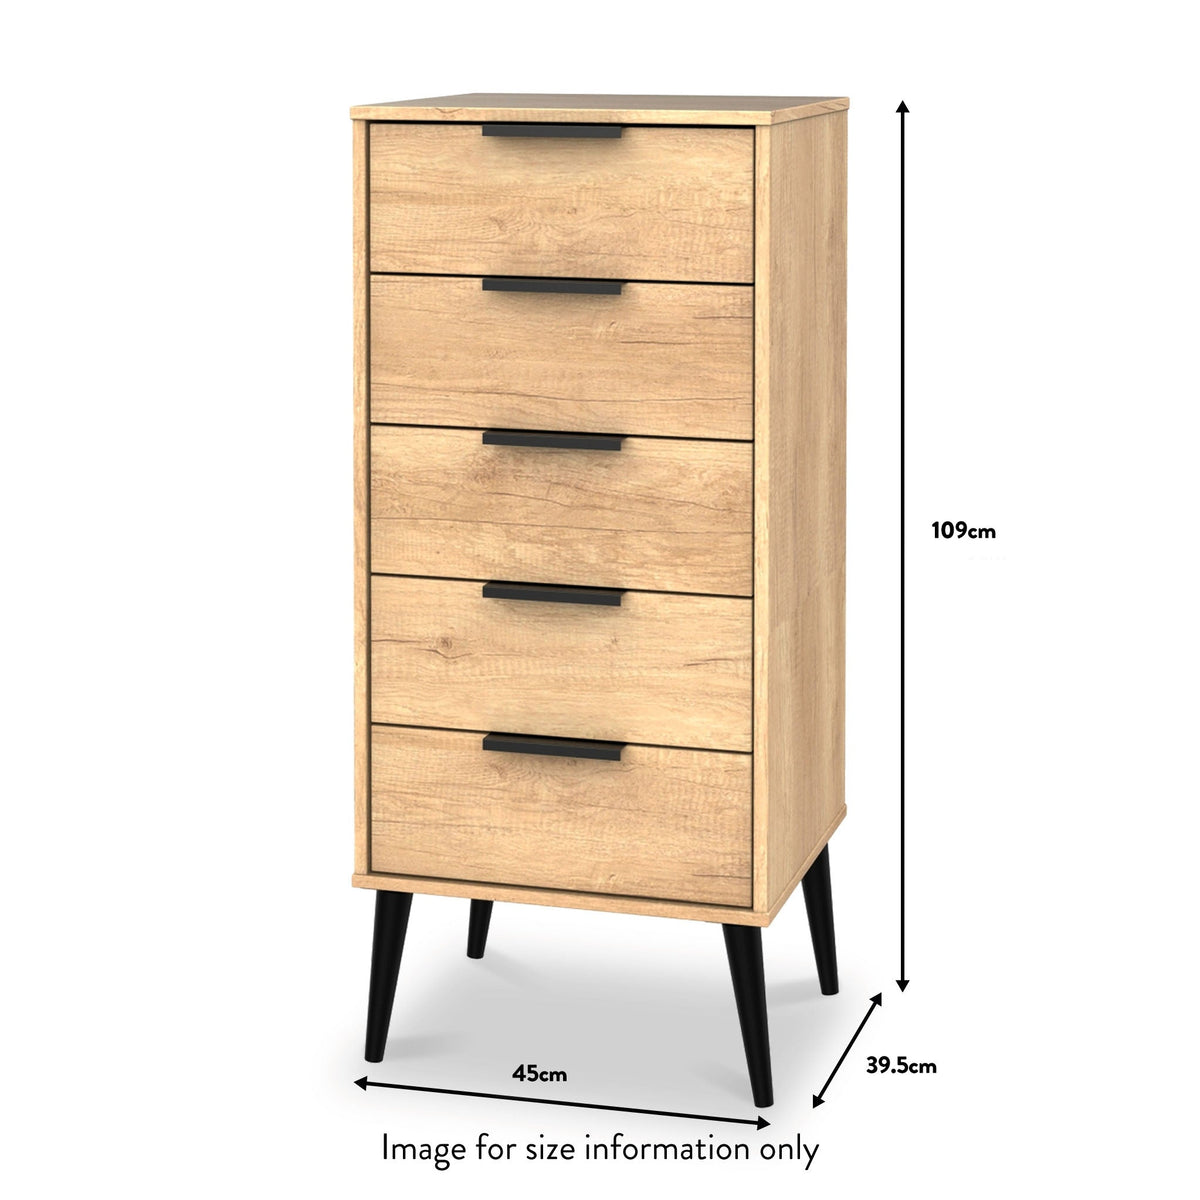 Asher Light Oak 5 Drawer Tallboy Chest with black legs dimensions